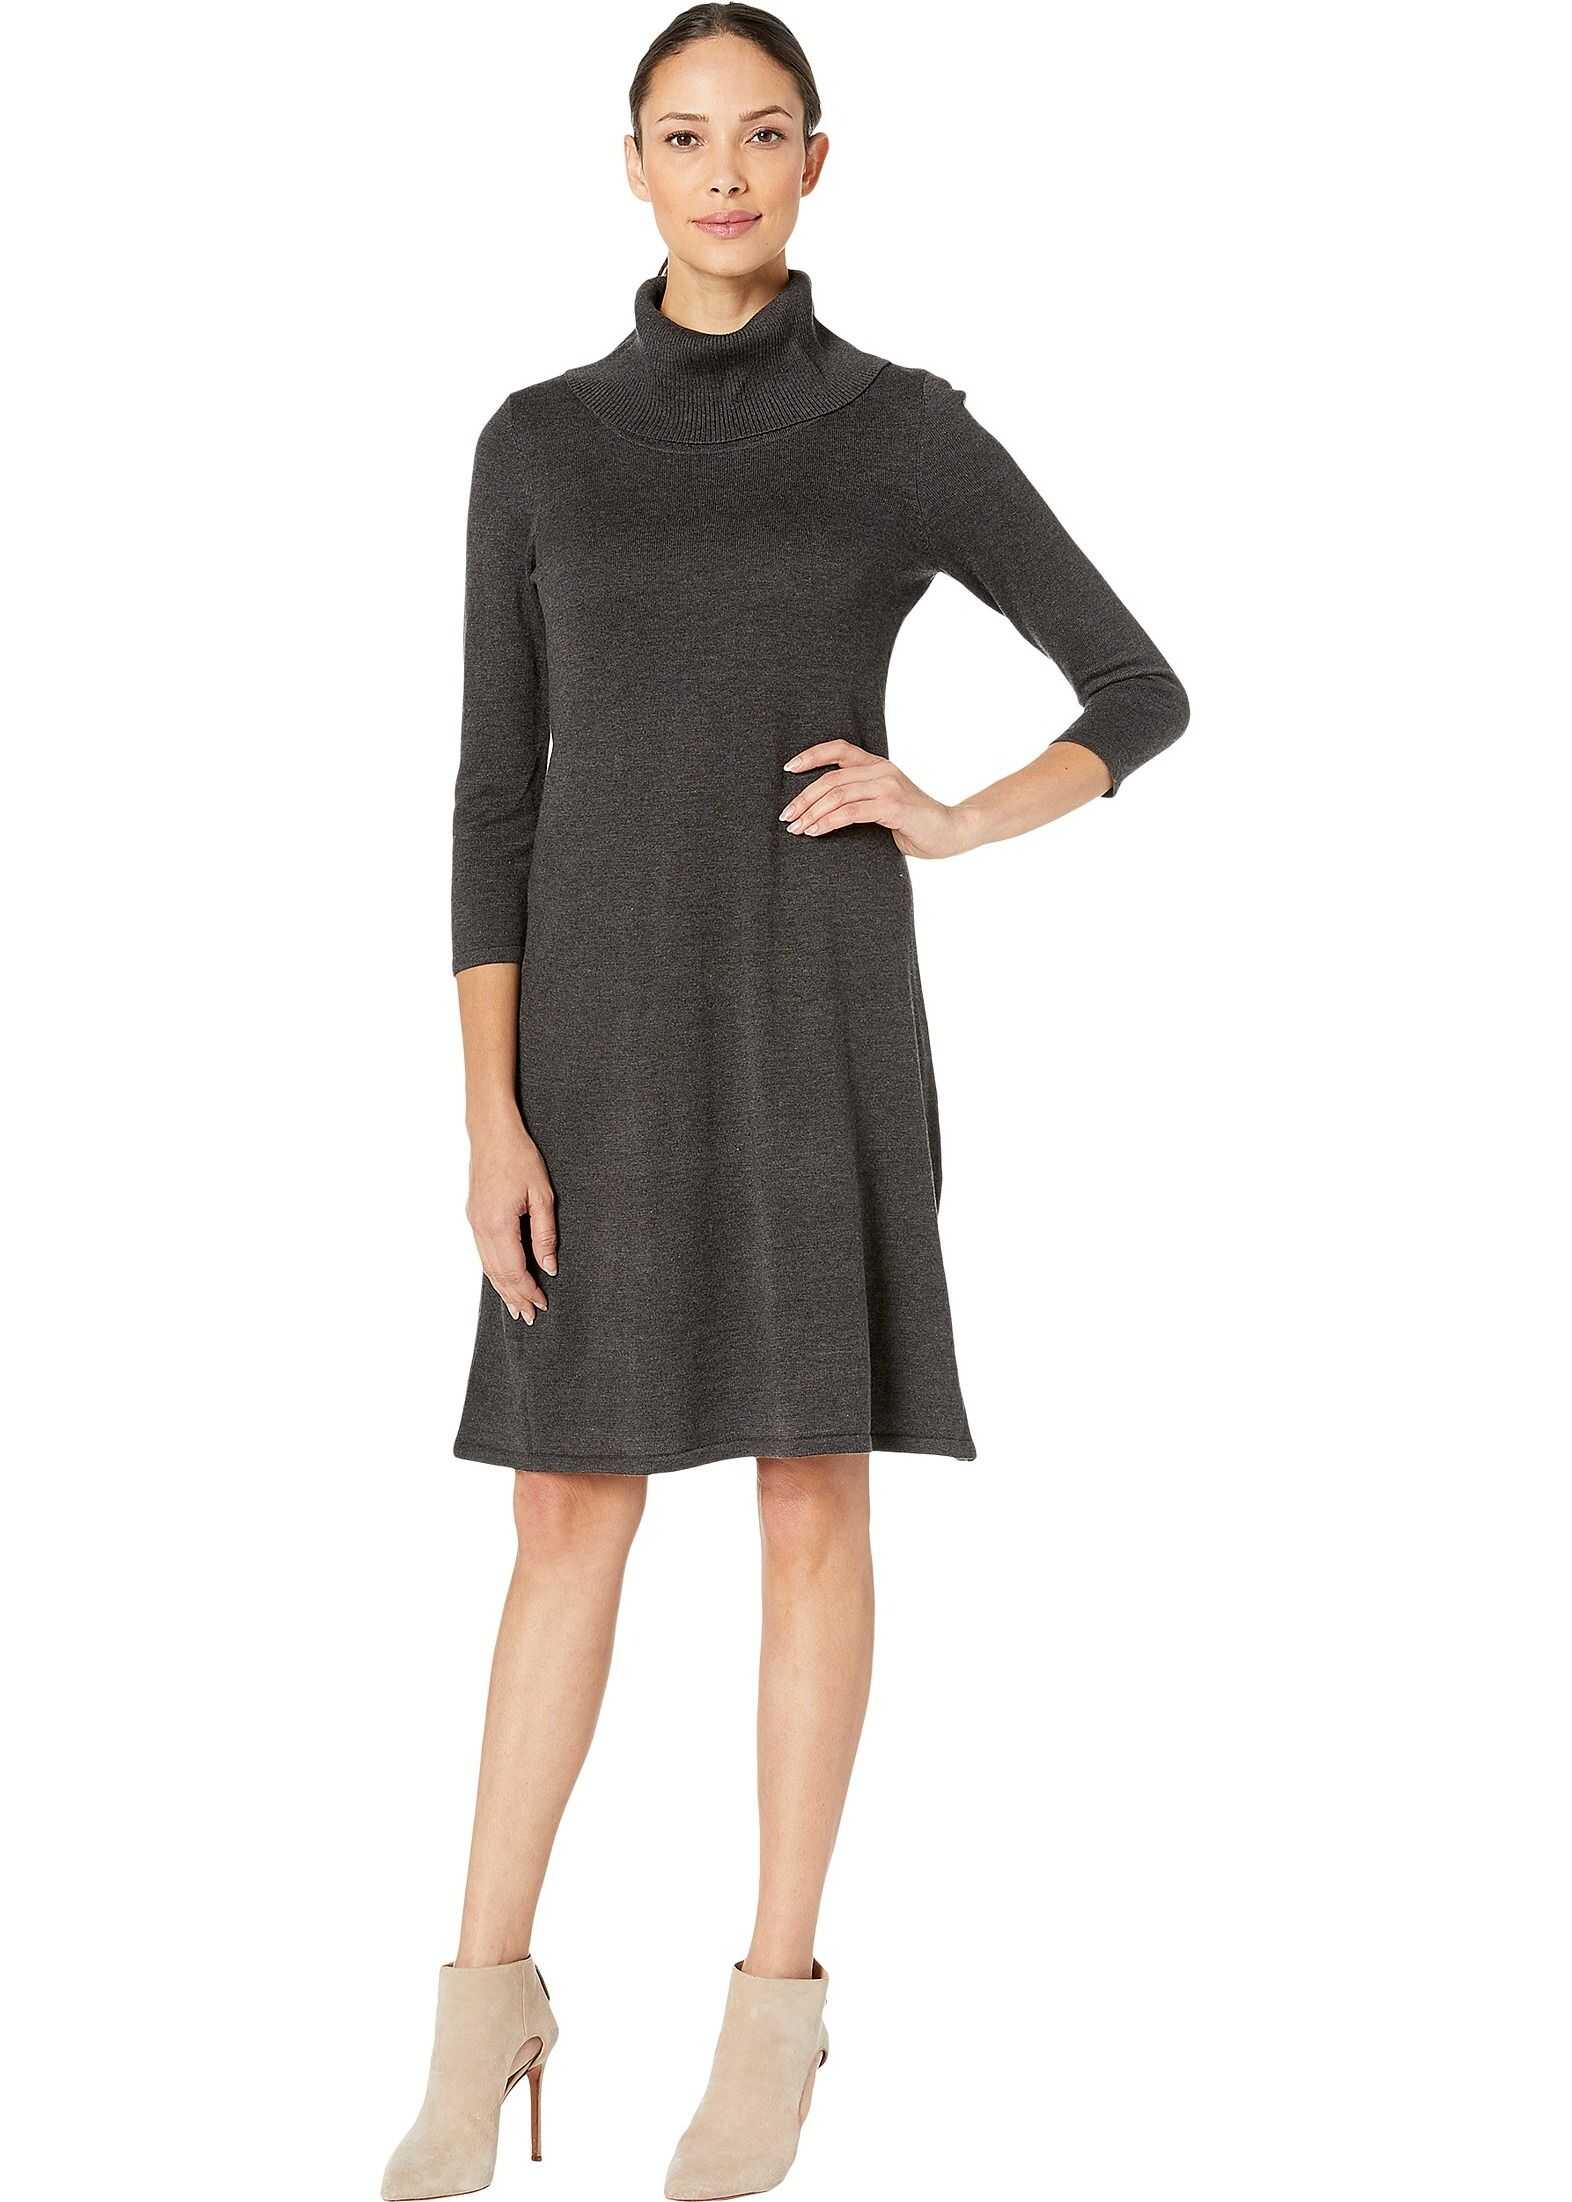 Nine West Cowl Neck Fit-and-Flare Knit Dress Charcoal Heather